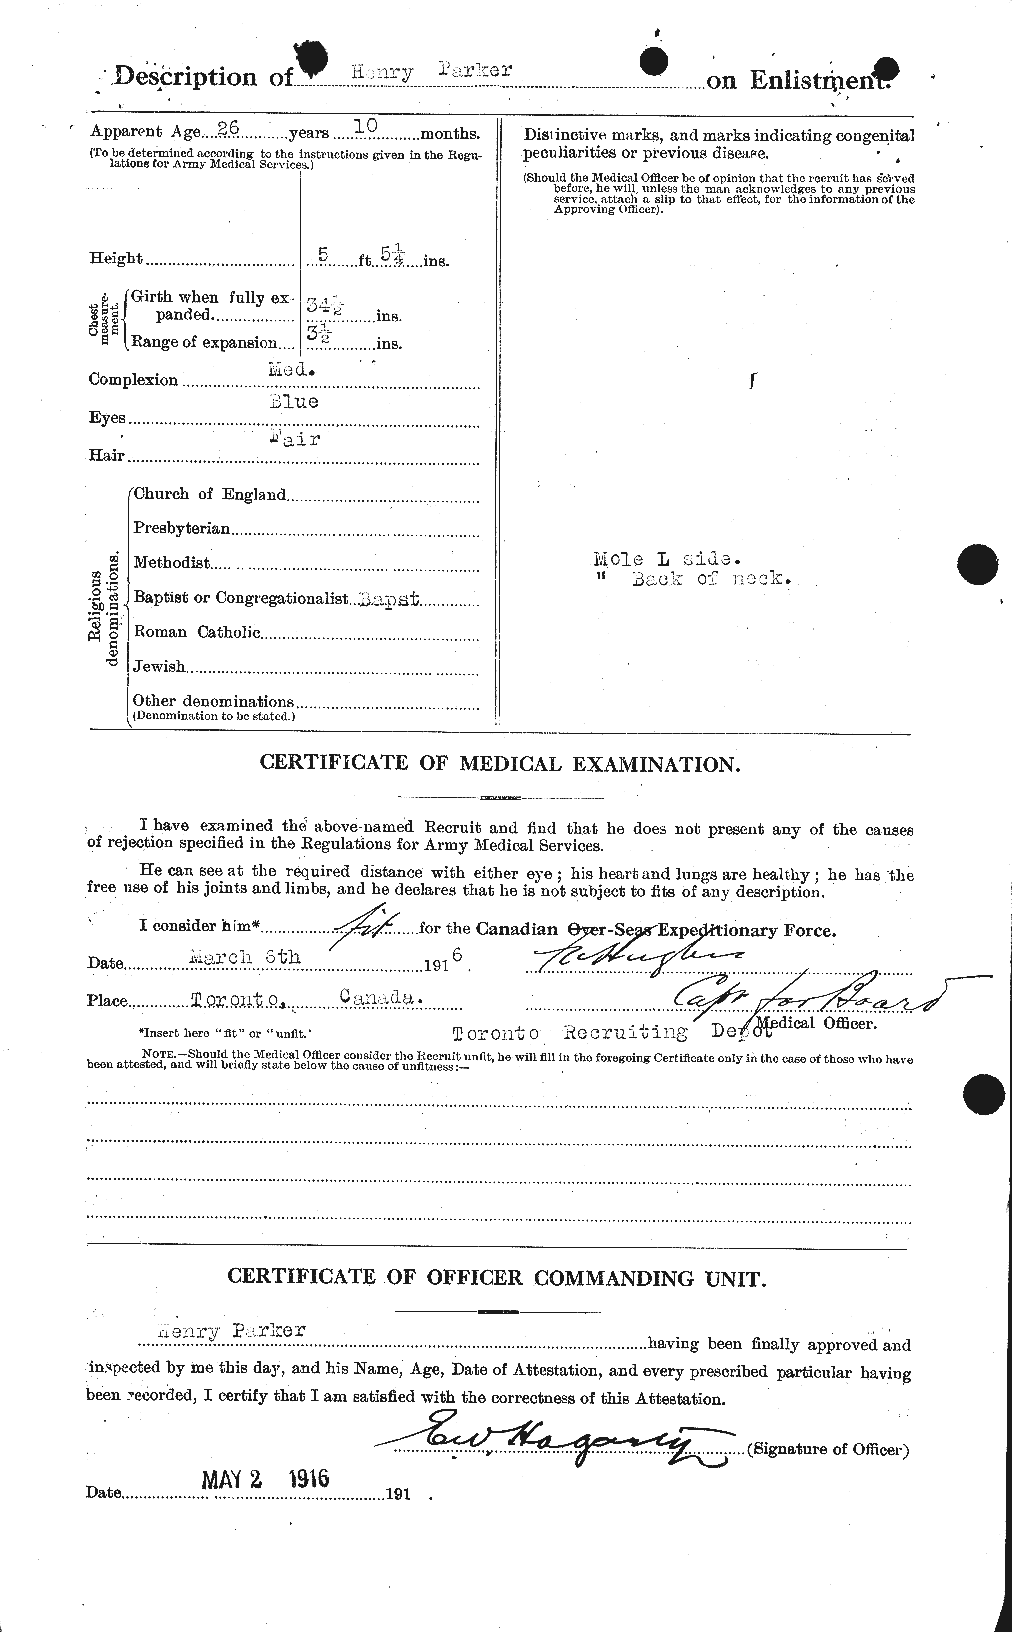 Personnel Records of the First World War - CEF 565344b